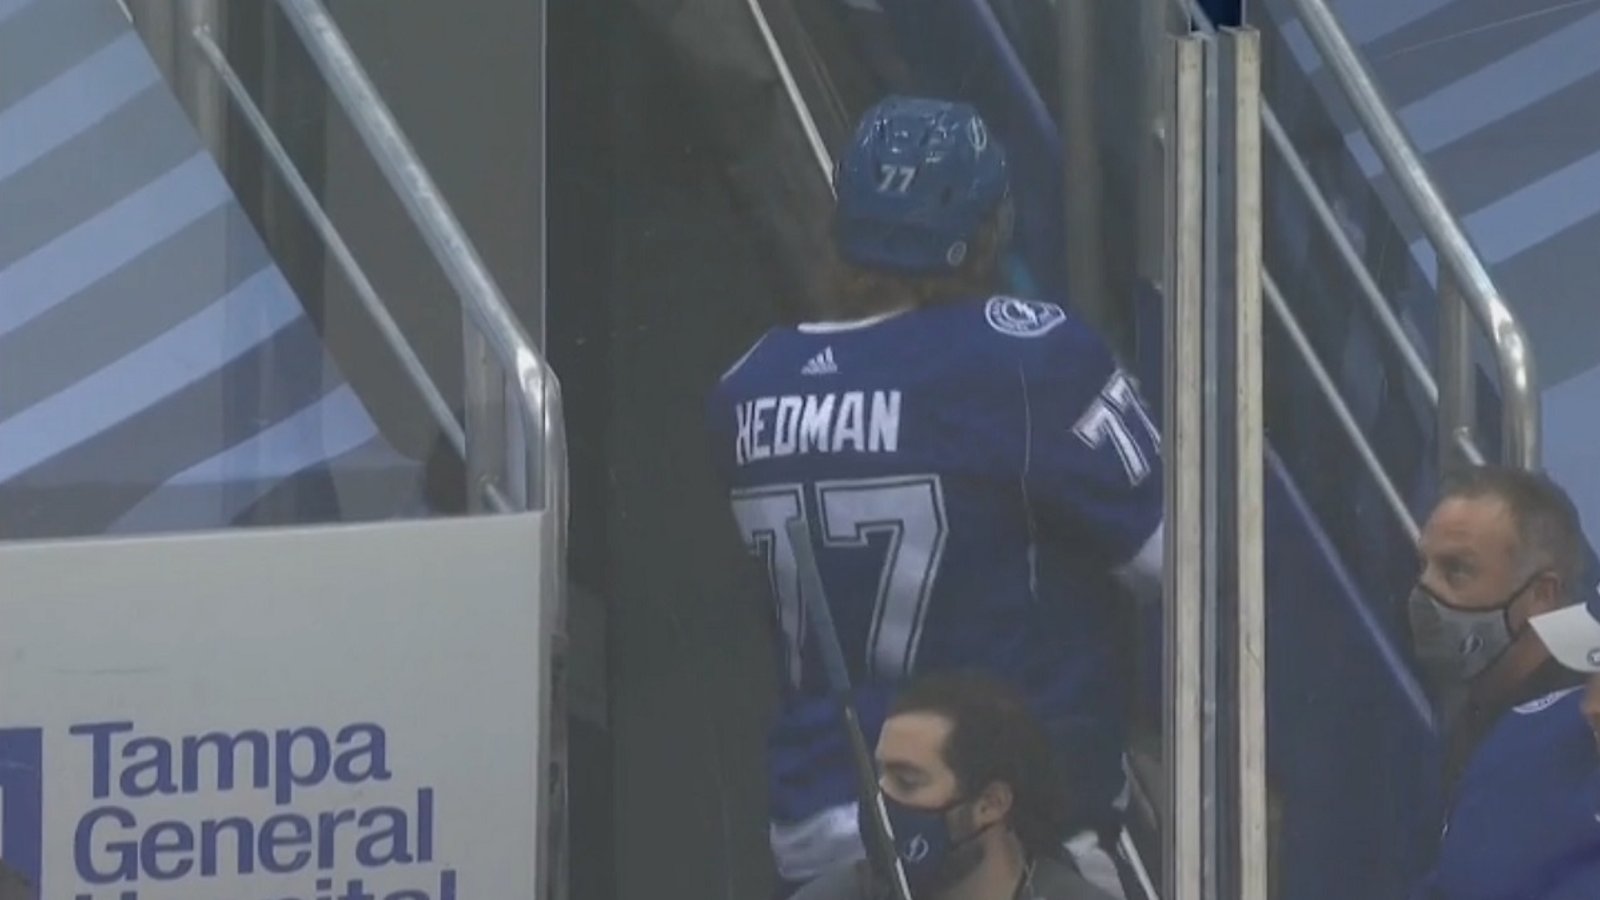 Hedman appears to suffer an injury and snaps on his way to the locker room.